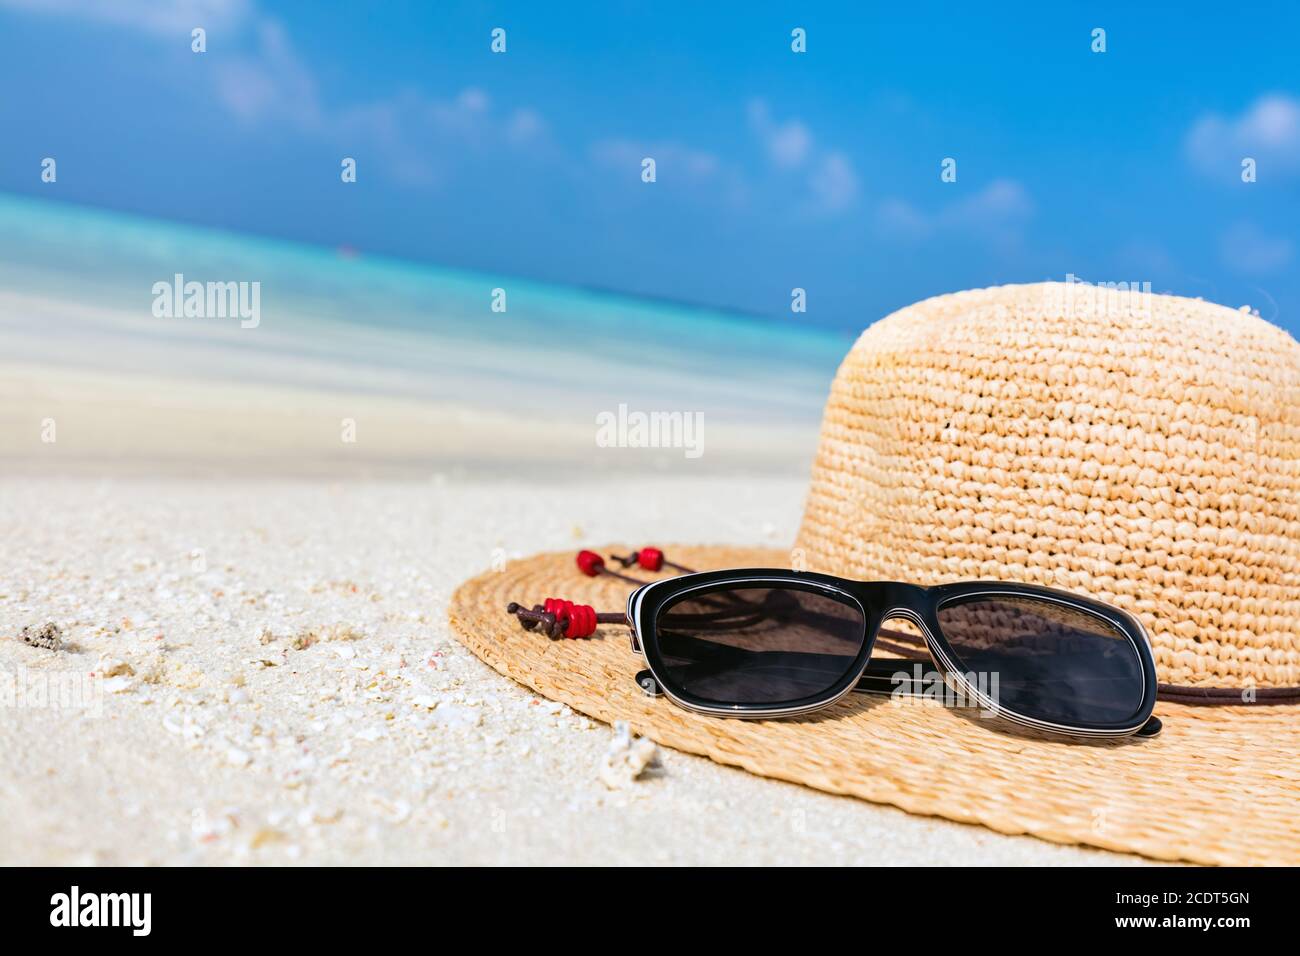 Sun hat and sunglasses on sand, clear turquoise ocean in Maldives. Stock Photo